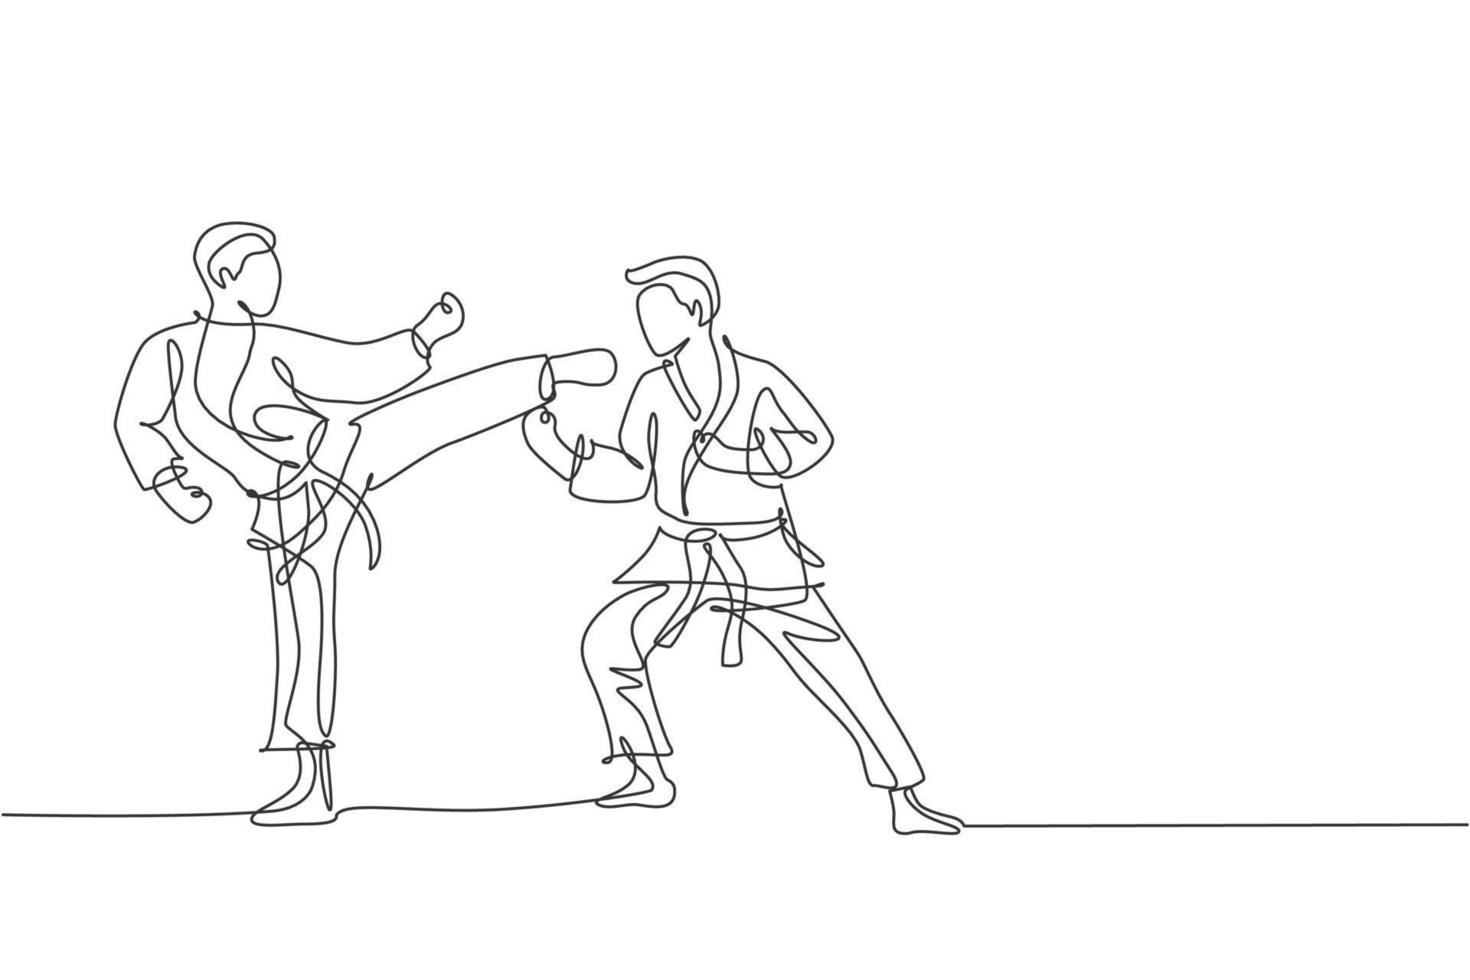 One continuous line drawing of two young talented karateka men train pose for duel fighting at dojo gym center. Mastering martial art sport concept. Dynamic single line draw design vector illustration